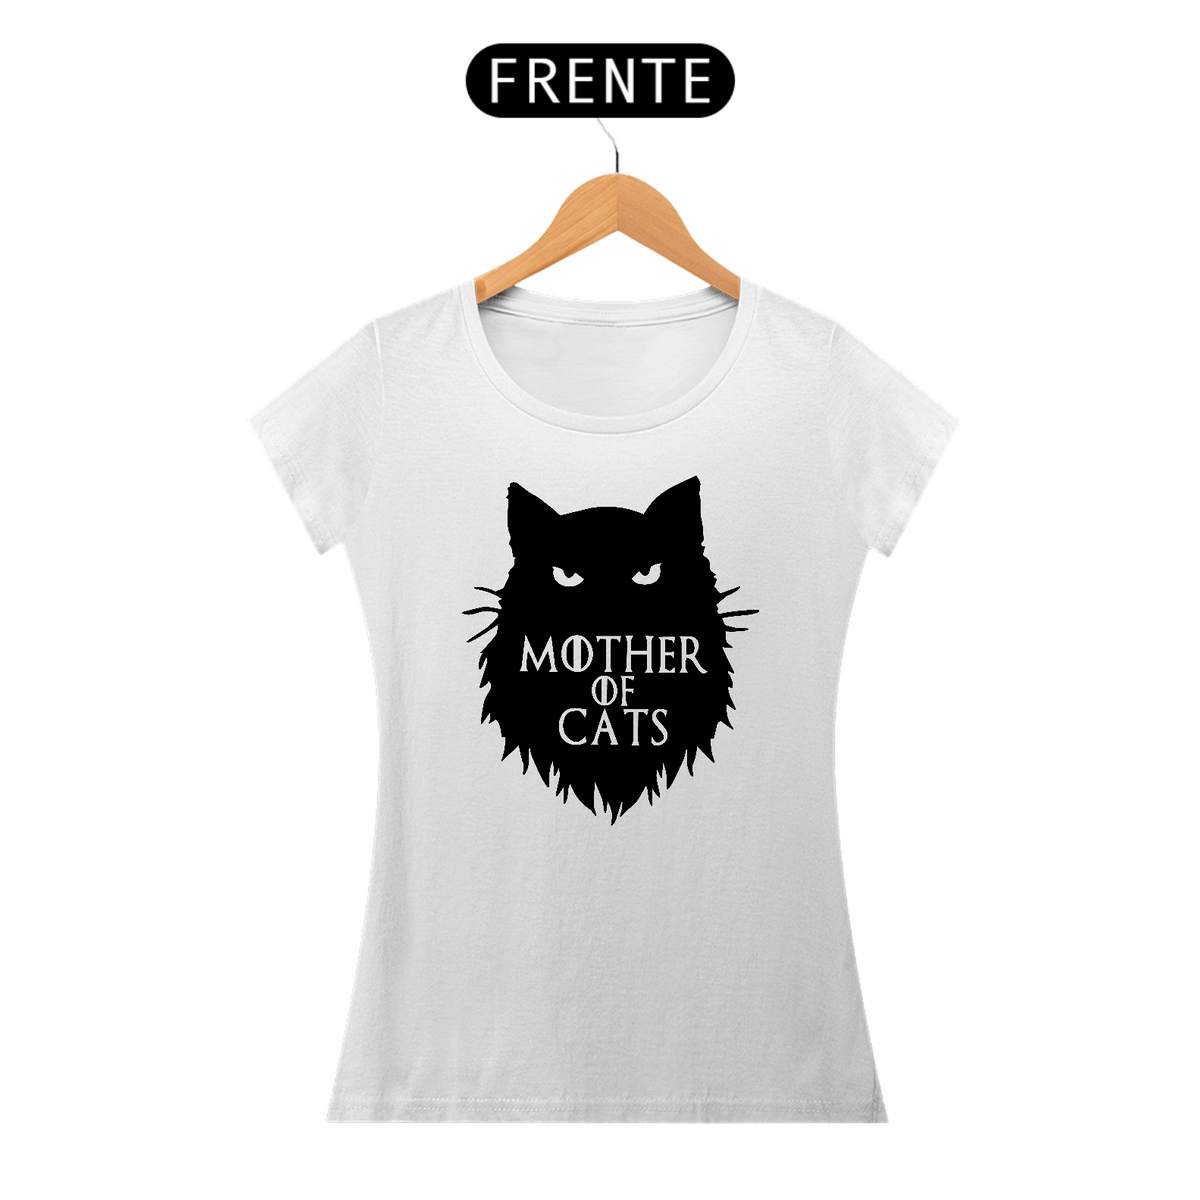 Nome do produto: Camisa Baby  Long Prime Mother of Cats